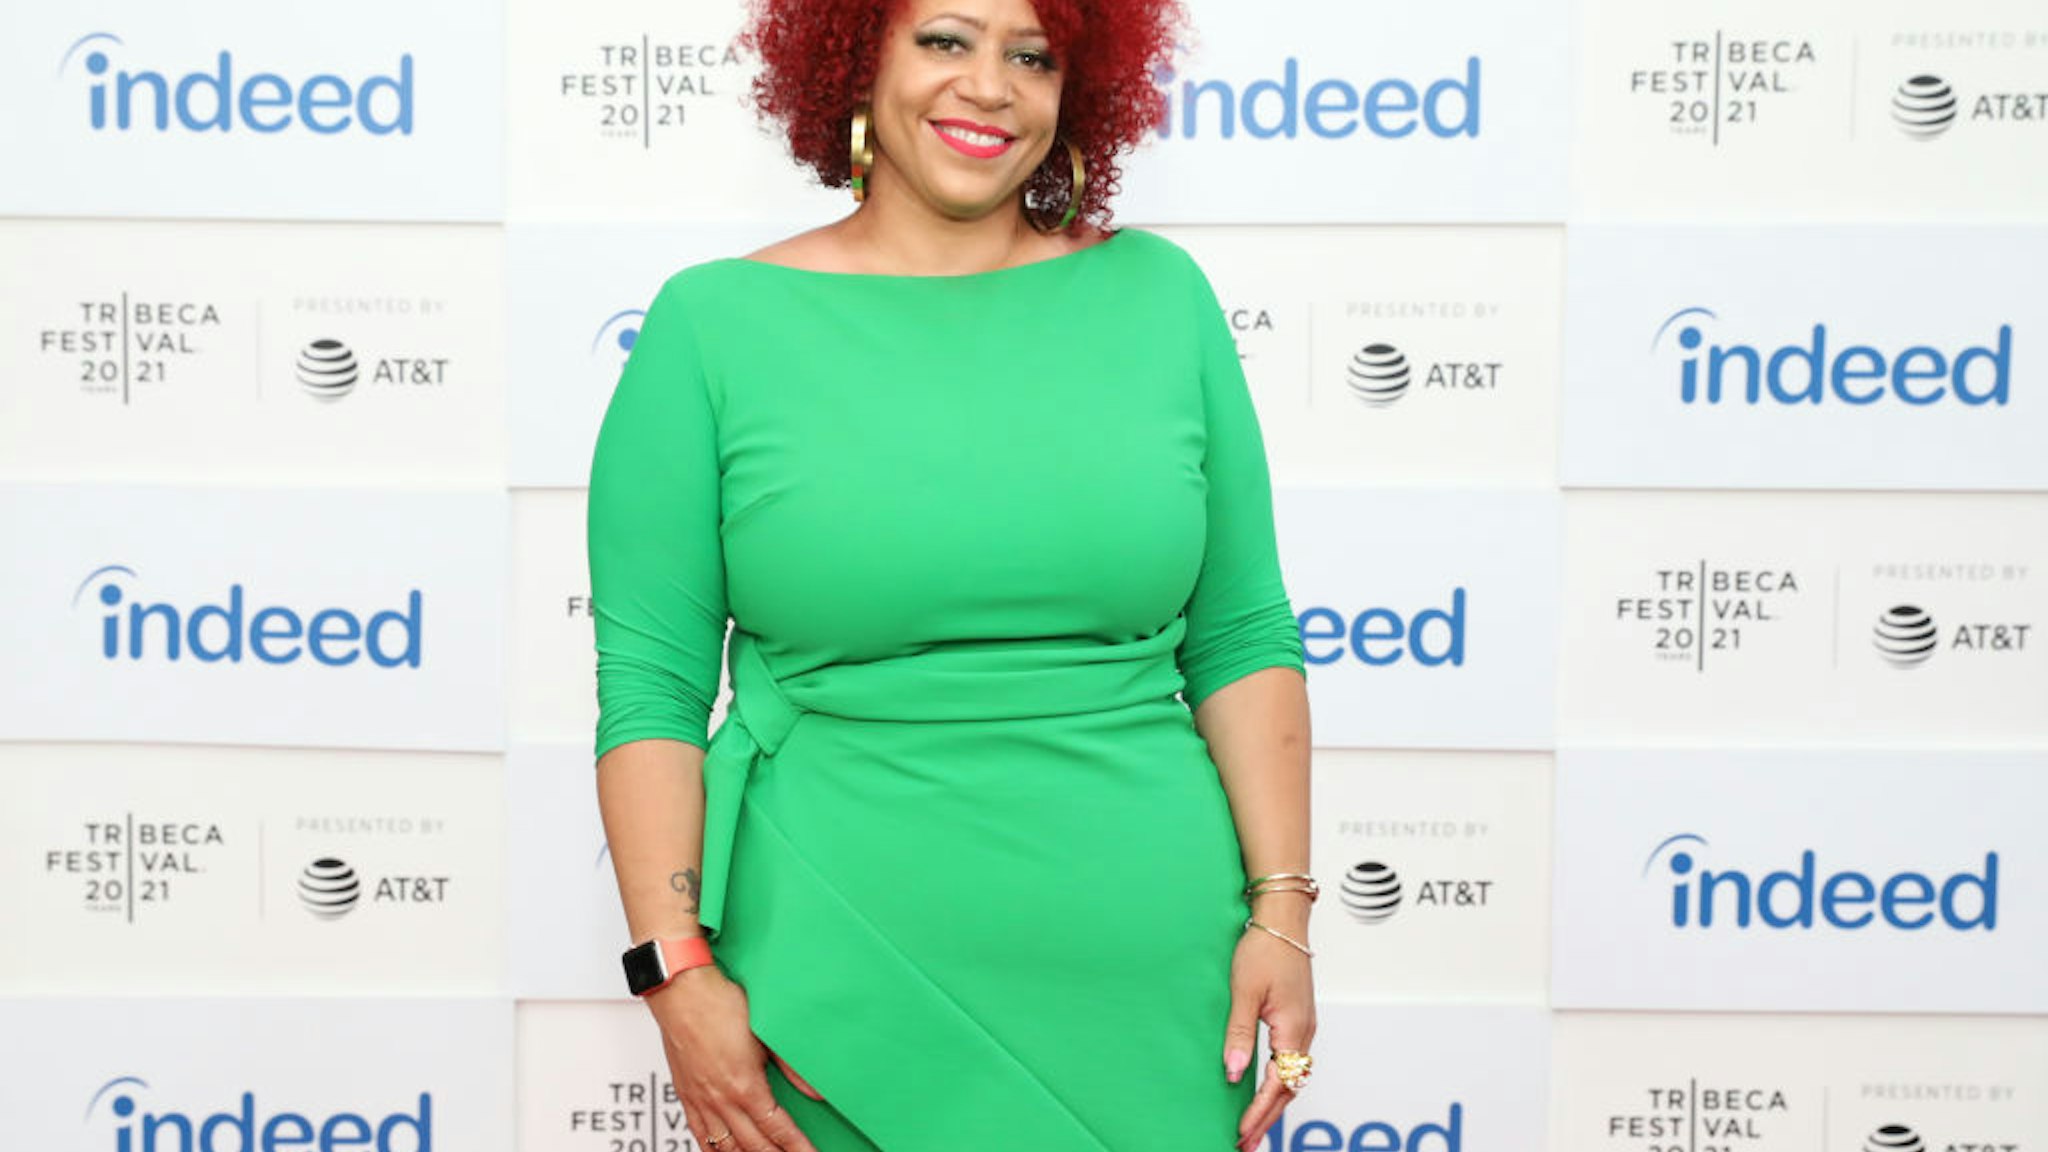 Nikole Hannah-Jones attends the "Neutral Ground" premiere during the 2021 Tribeca Festival at Pier 76 on June 19, 2021 in New York City.